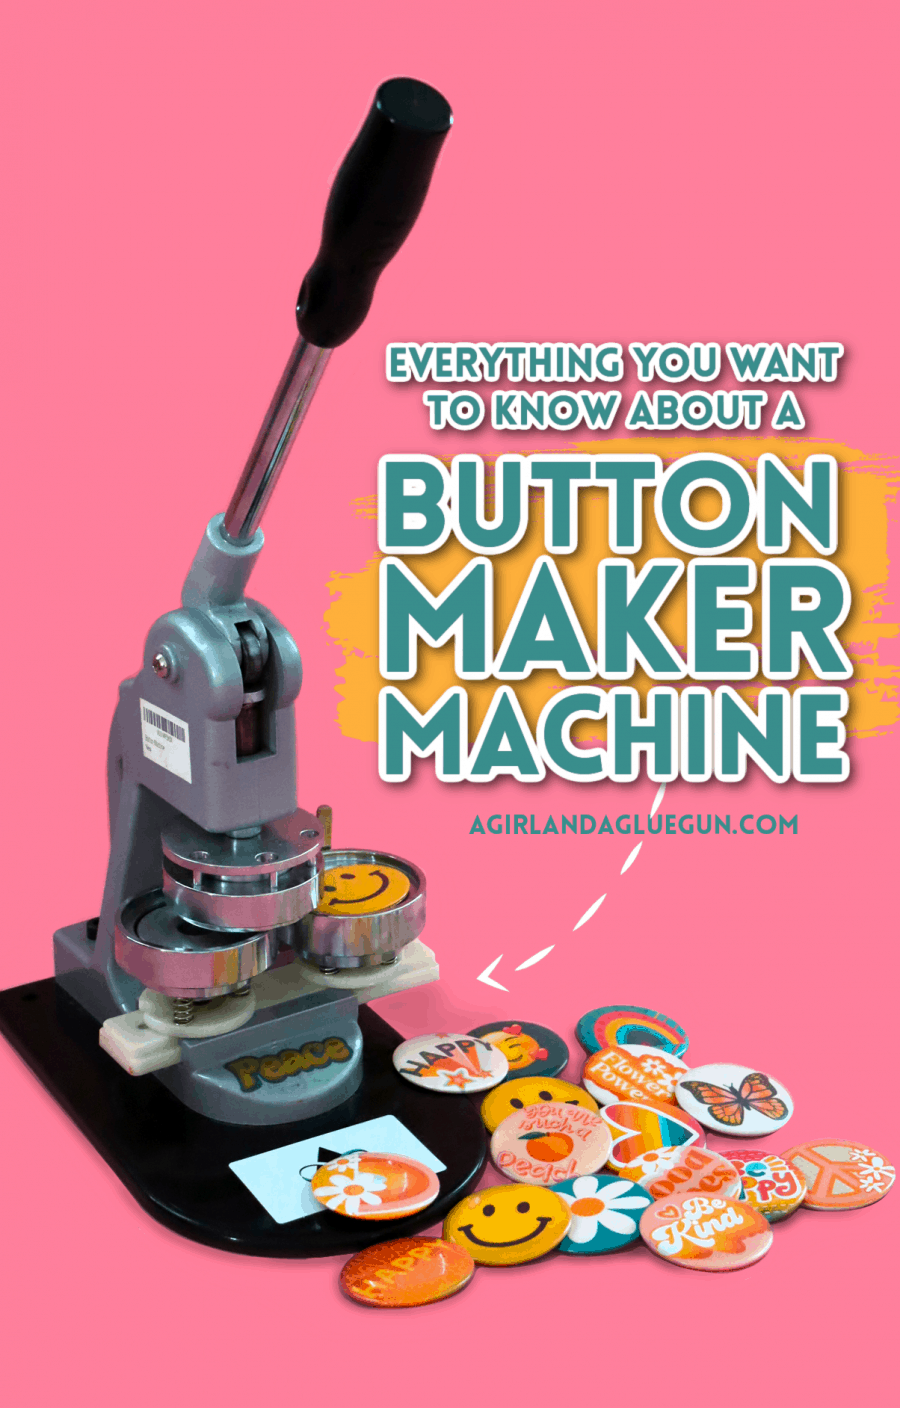 https://www.agirlandagluegun.com/wp-content/uploads/2019/08/everything-you-want-to-know-about-a-button-maker-machine-900x1408.png